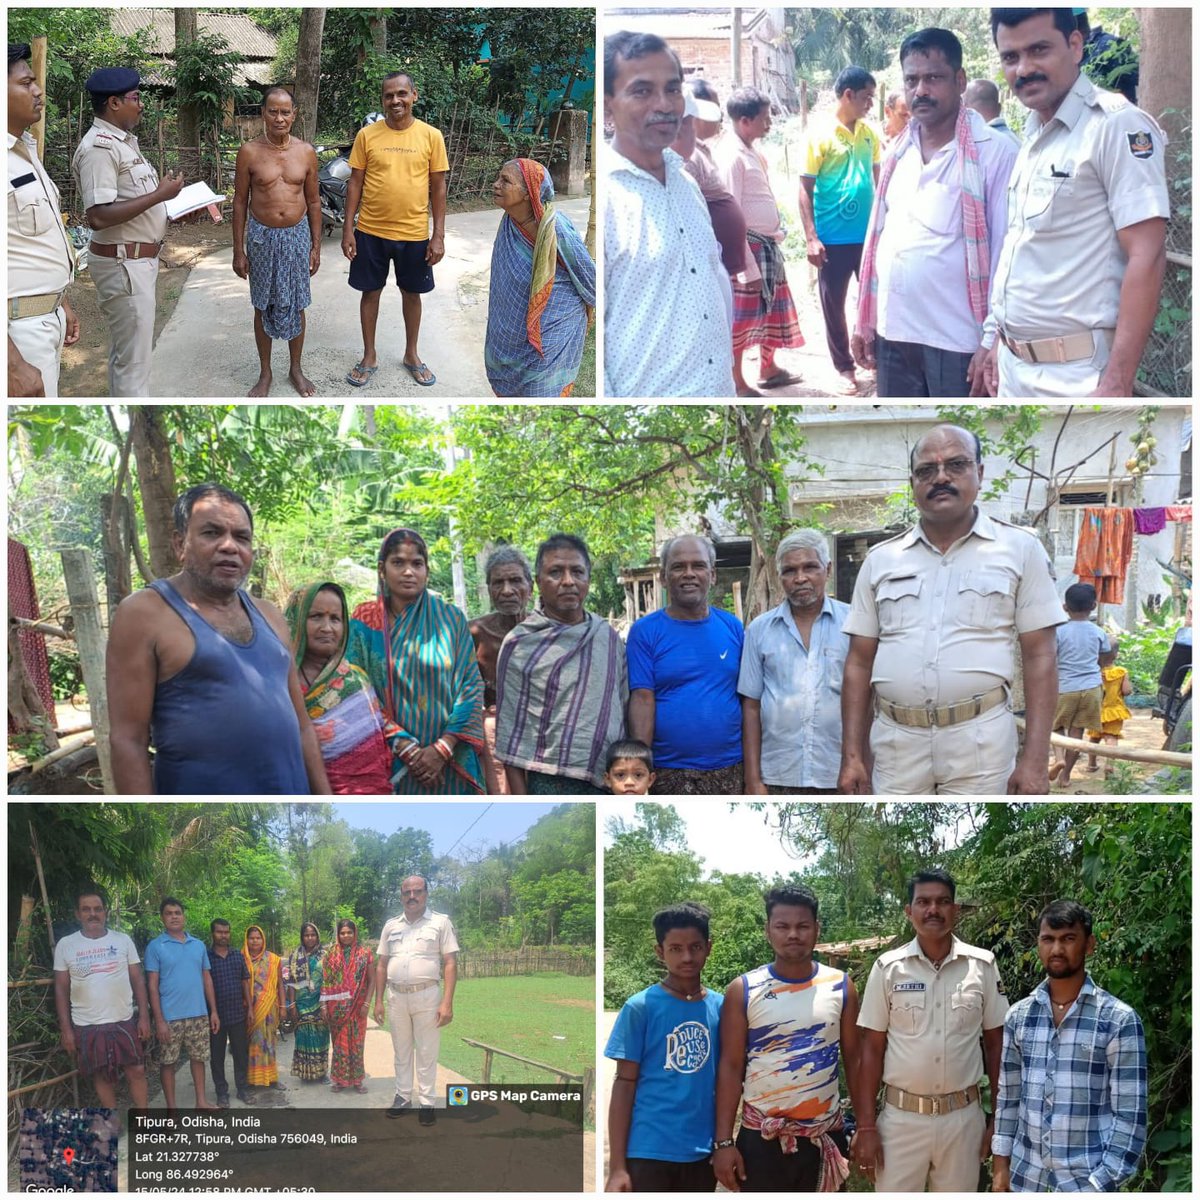 Under the leadership of @SPBalasore, staff of different PSs of Balasore dist. are visiting villages, interacting with the villagers with an aim to build confidence in public and have better #PolicePublic coordination ahead of #GeneralElections2024.